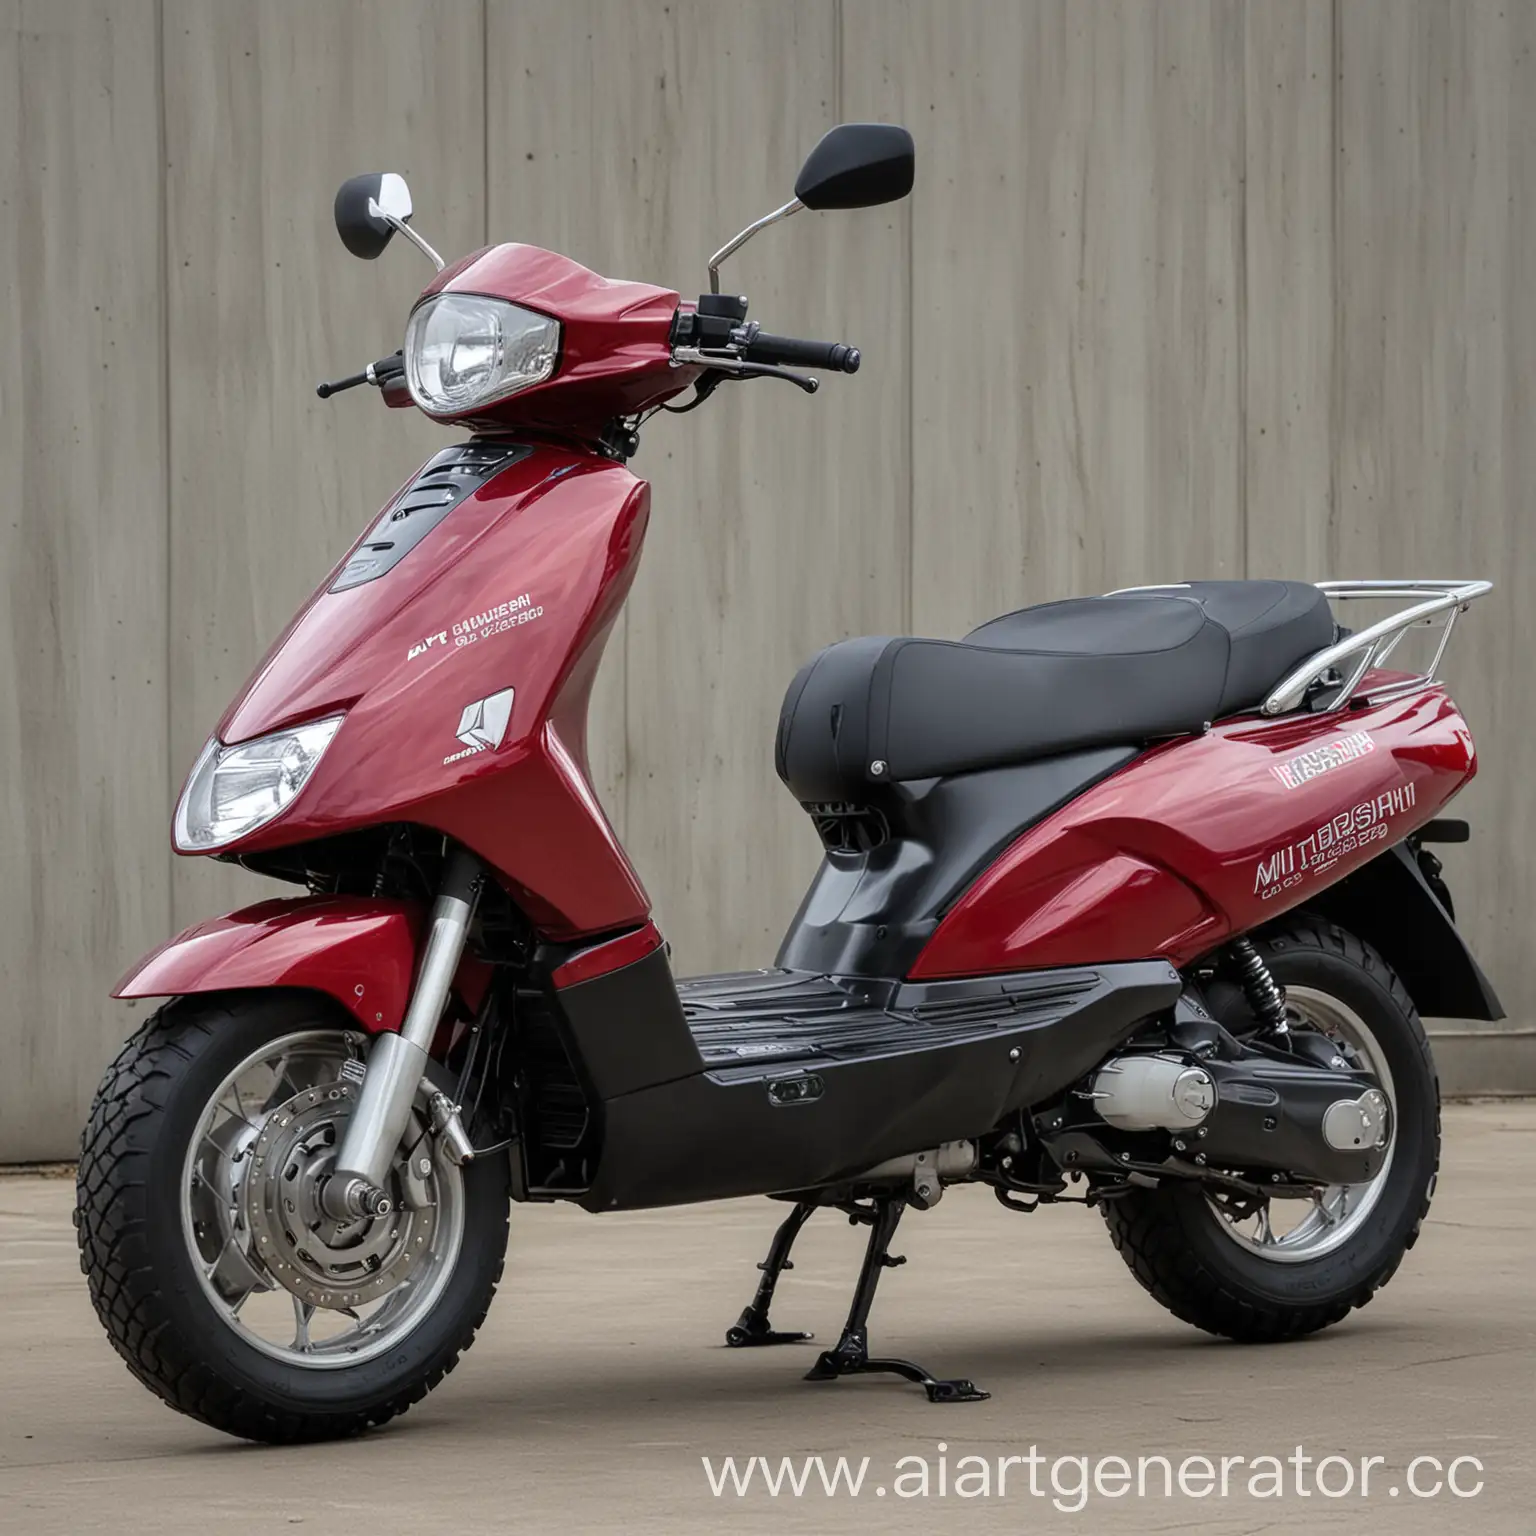 Vibrant-Red-Mitsubishi-Scooter-on-a-Sunny-Day